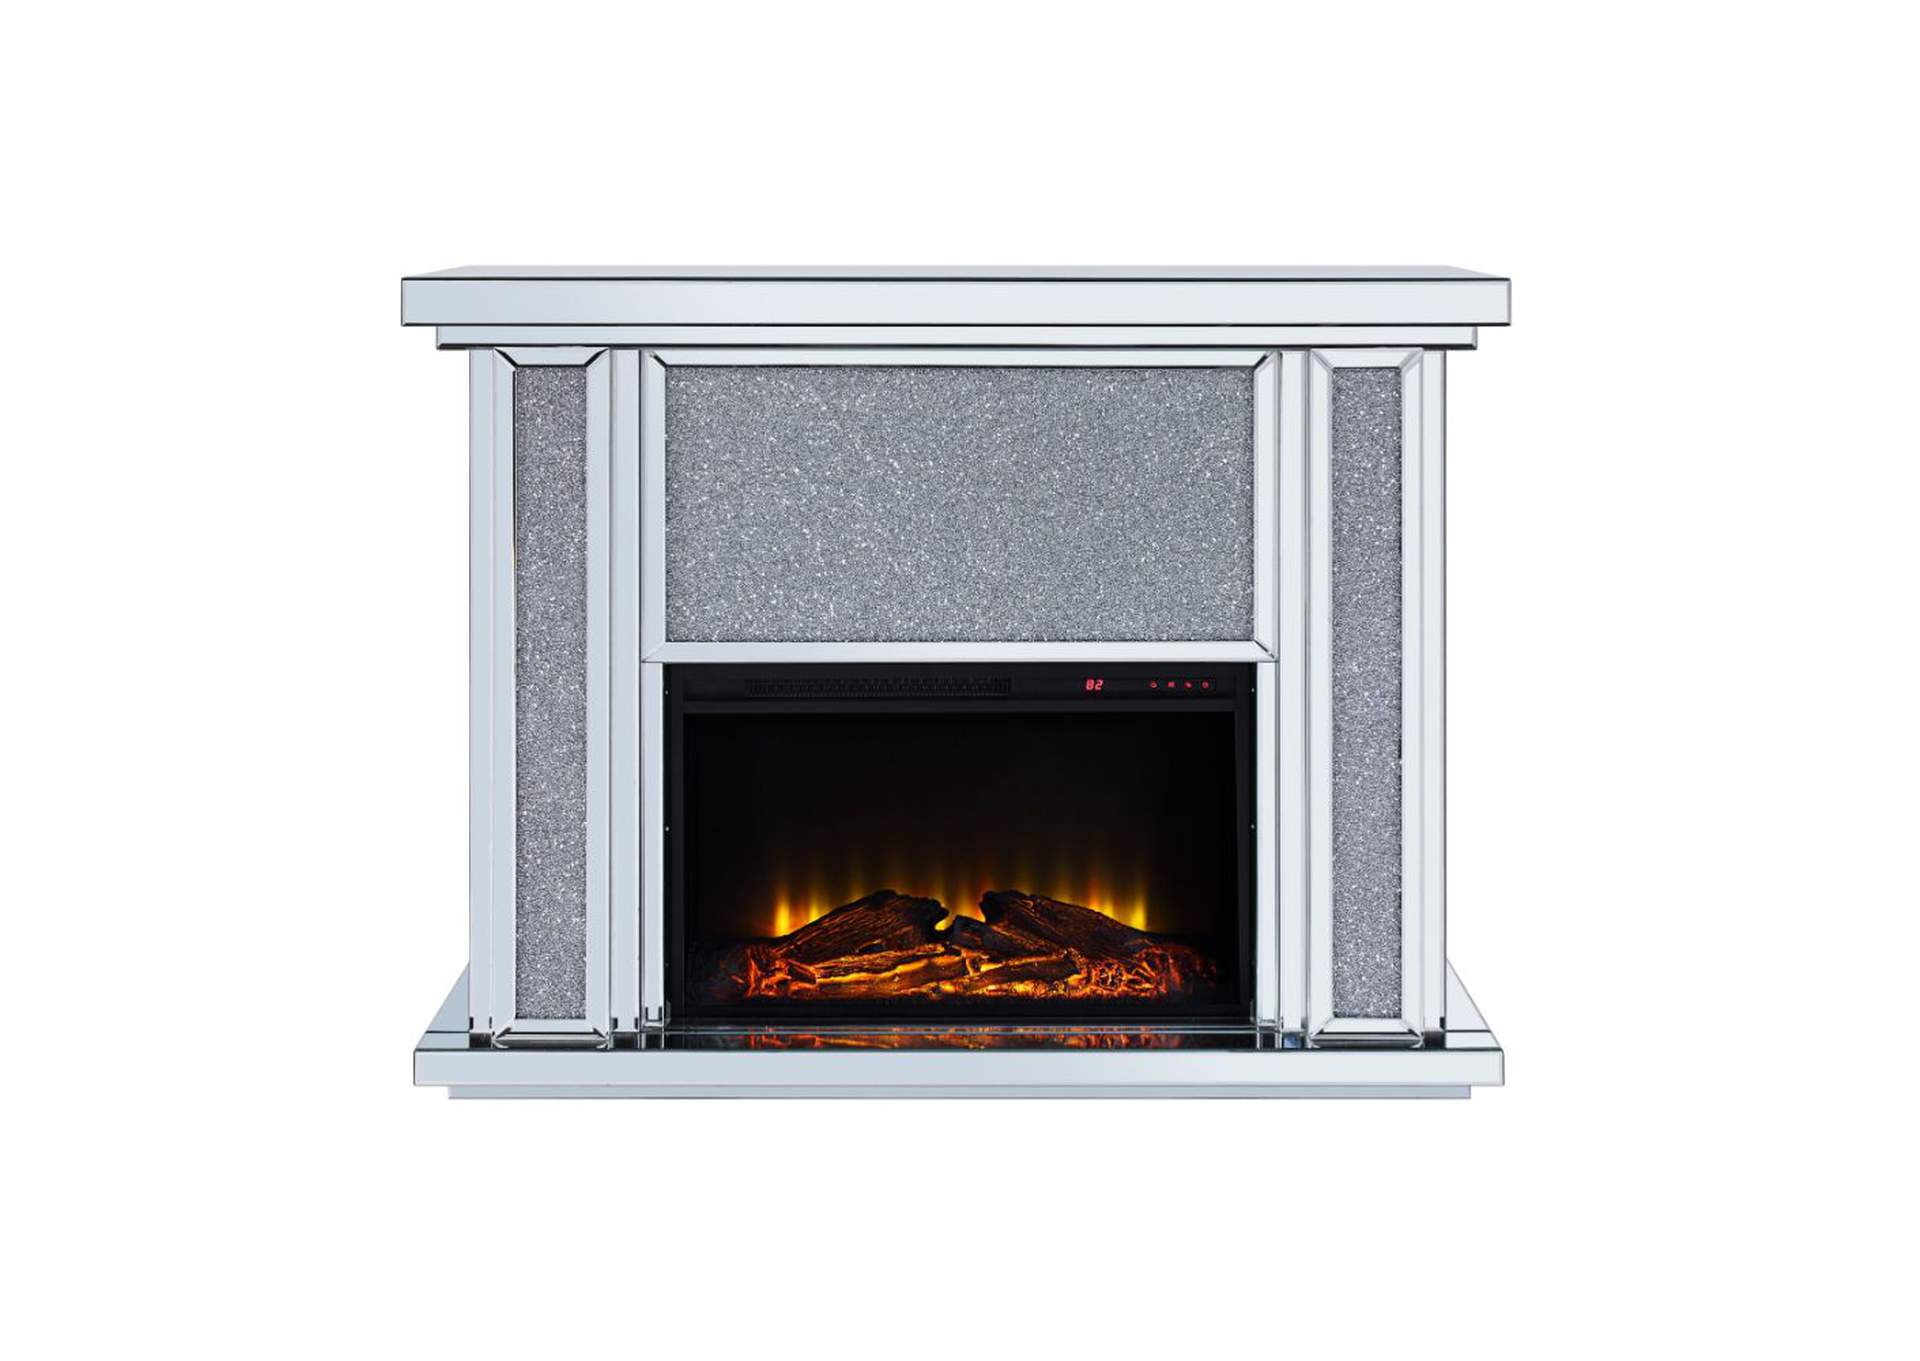 Nowles Mirrored & Faux Stones Fireplace,Acme